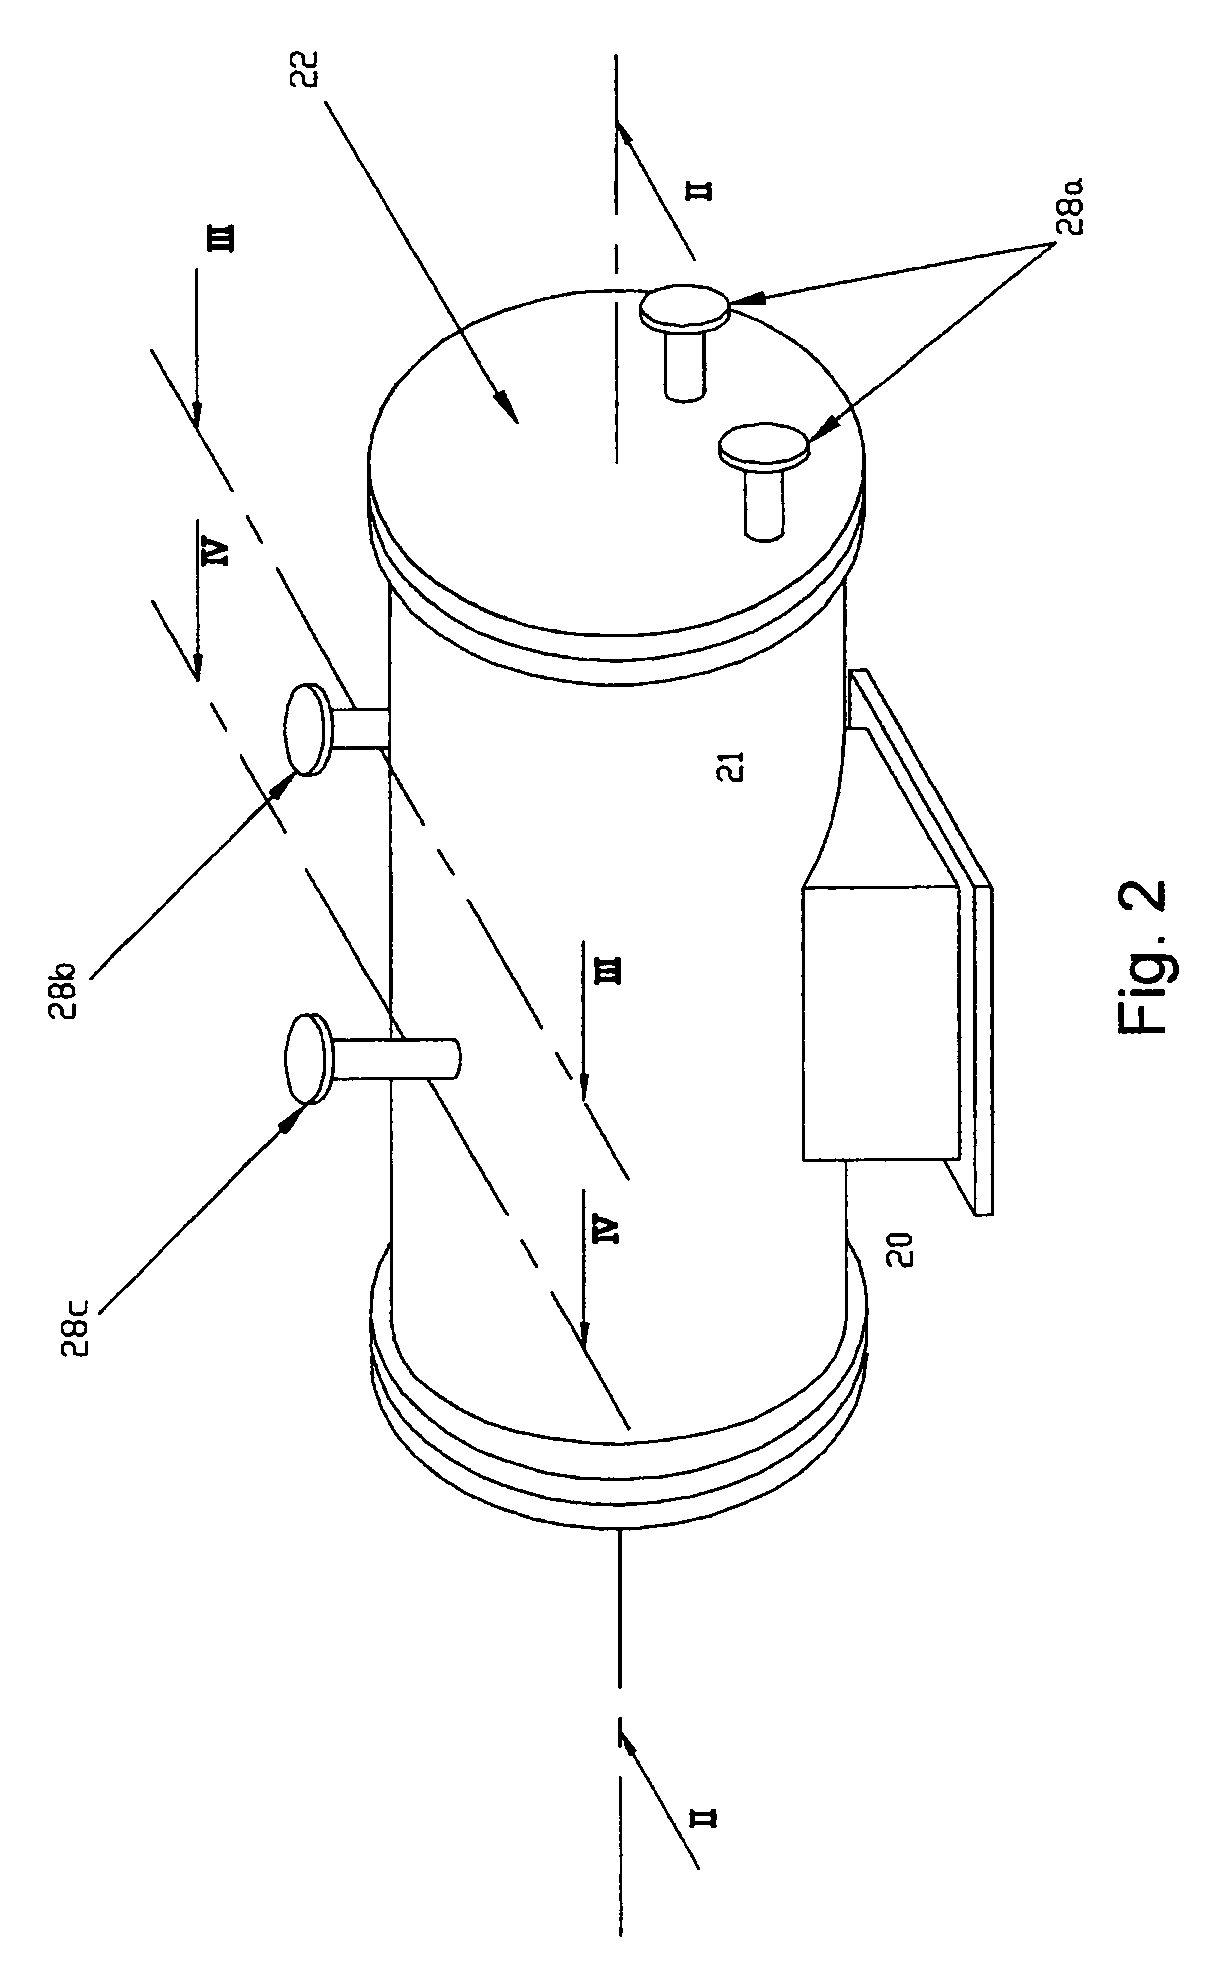 High pressure-resistant type electrical deionization apparatus, high pressure-resistant type electrical deionization system and method of producing ultrapure water using high pressure-resistant type deionization system